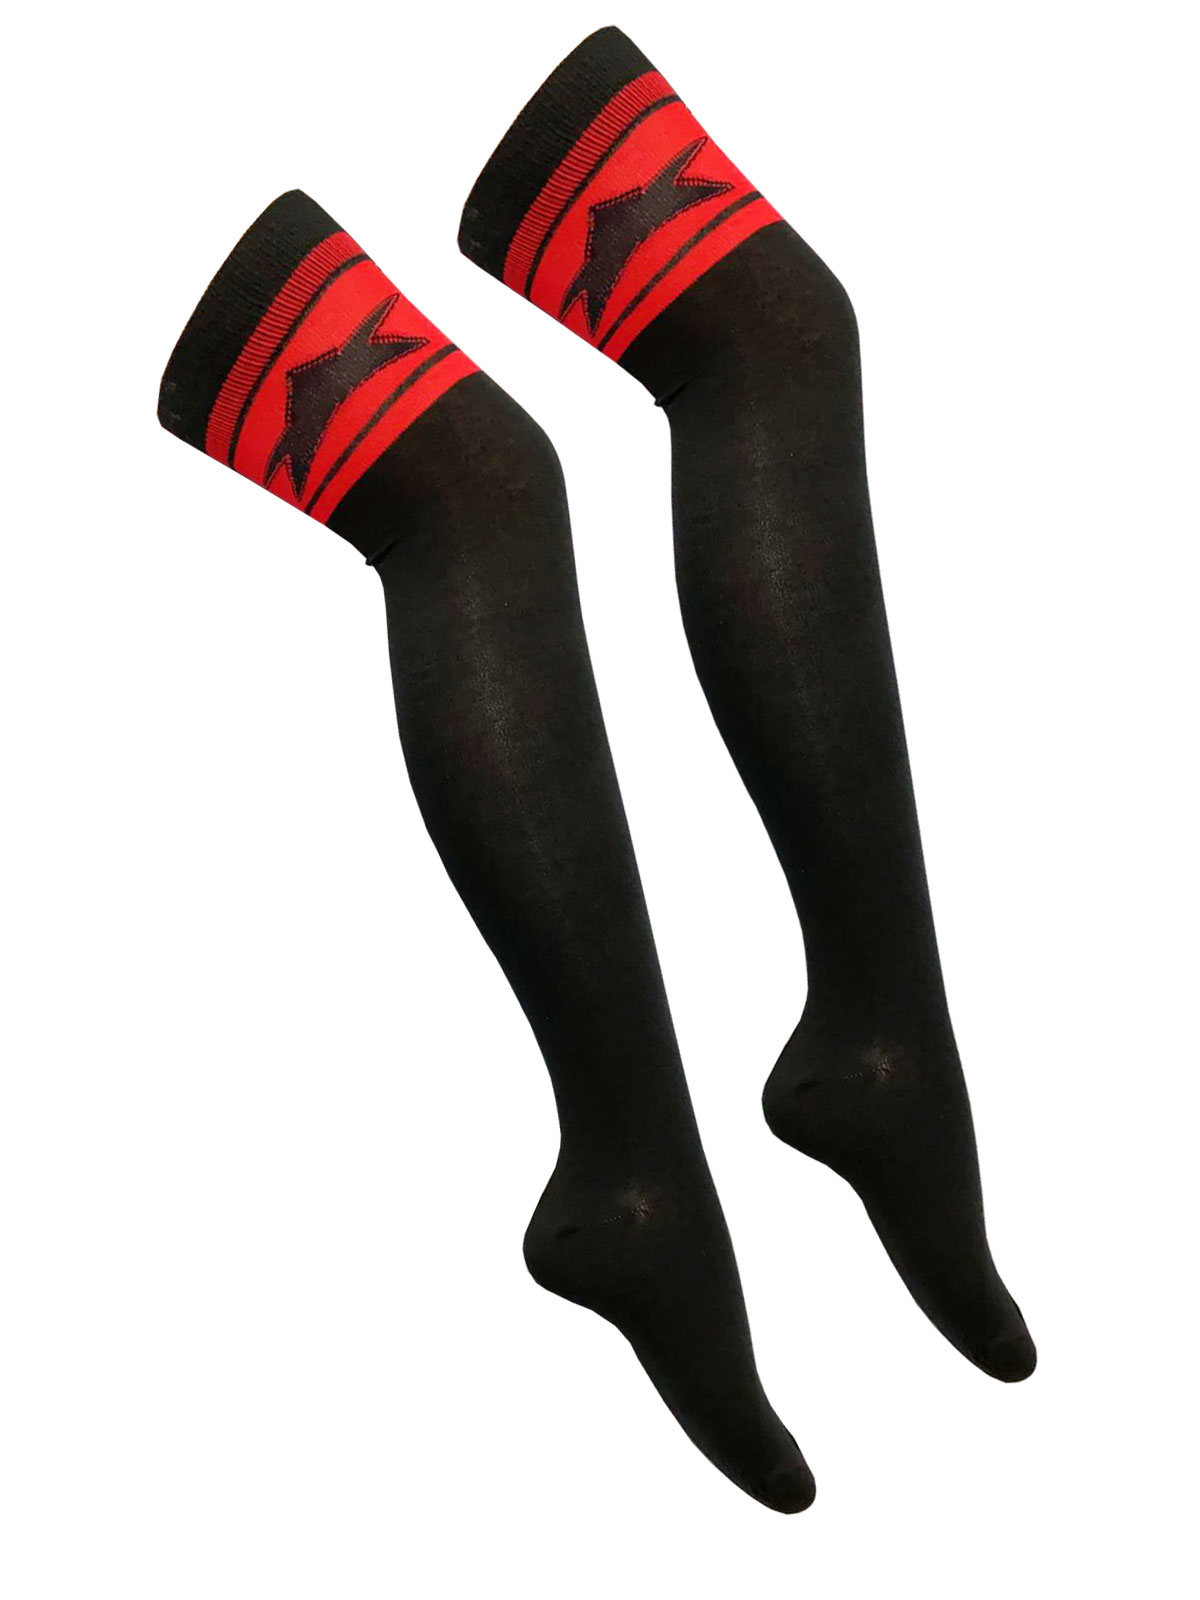 Crazy Chick Adult 3 Stripe Referee OTK Black With Red with Star (12 Pairs)